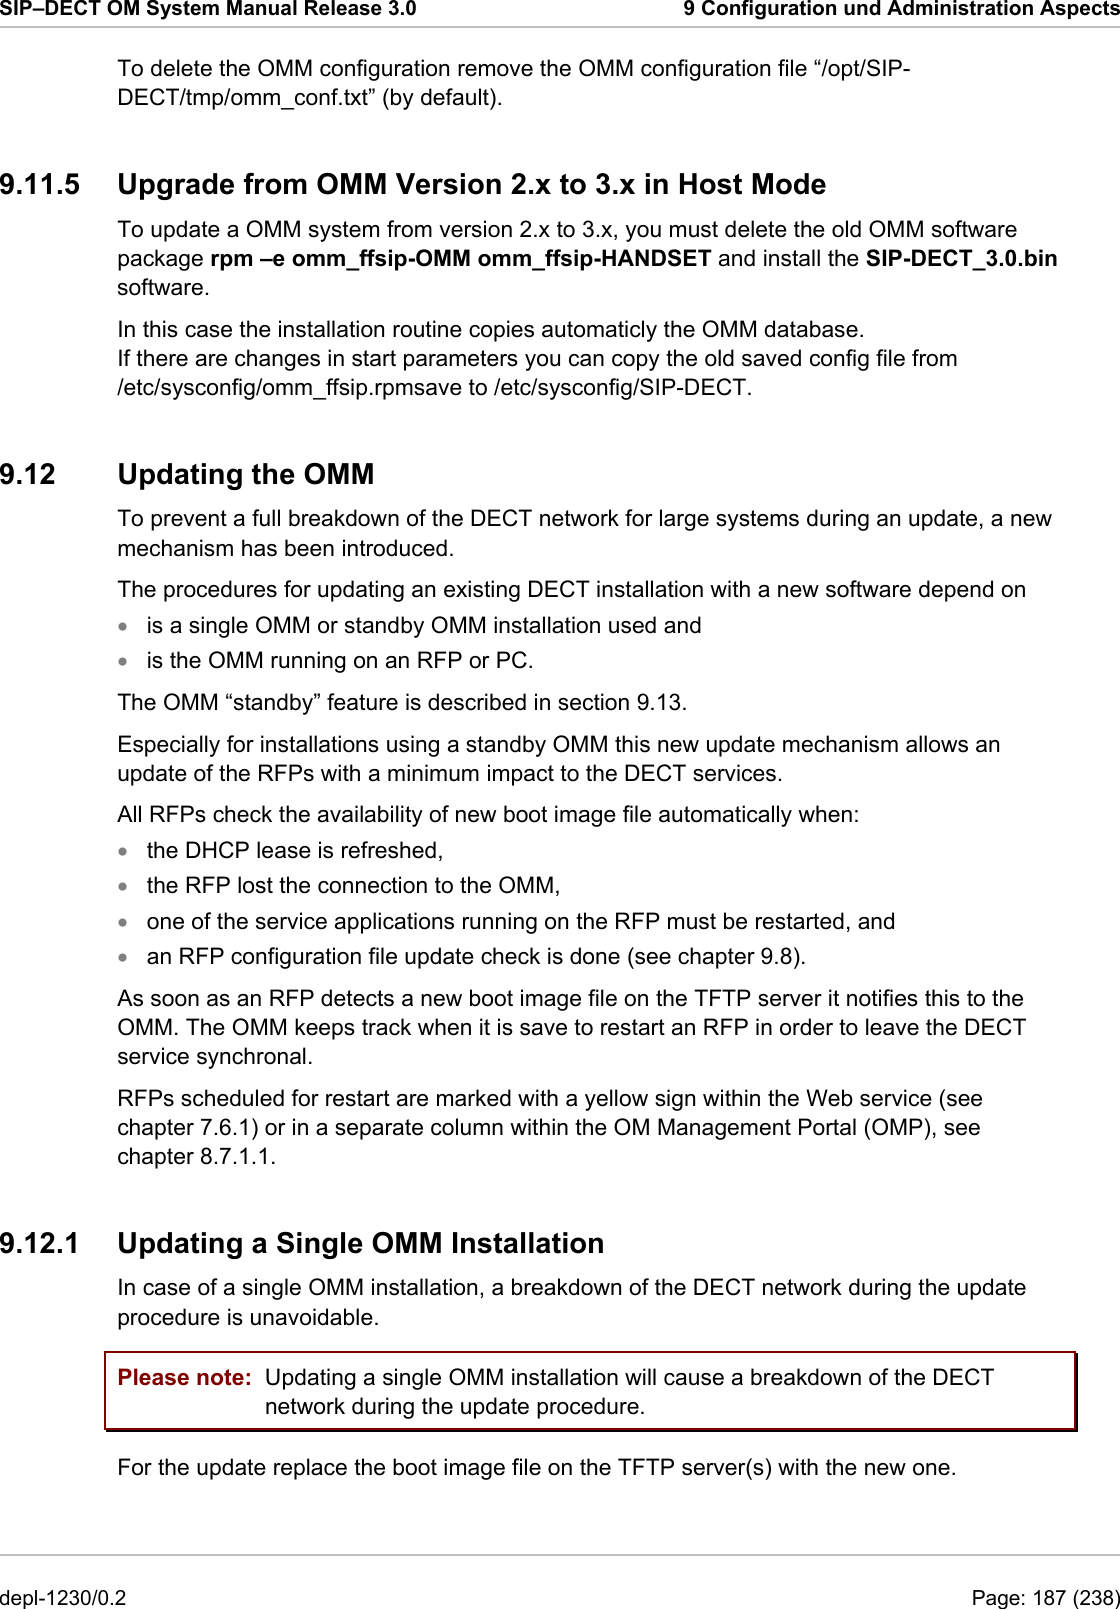 SIP–DECT OM System Manual Release 3.0  9 Configuration und Administration Aspects To delete the OMM configuration remove the OMM configuration file “/opt/SIP-DECT/tmp/omm_conf.txt” (by default). 9.11.5  Upgrade from OMM Version 2.x to 3.x in Host Mode To update a OMM system from version 2.x to 3.x, you must delete the old OMM software package rpm –e omm_ffsip-OMM omm_ffsip-HANDSET and install the SIP-DECT_3.0.bin software. 9.12  Updating the OMM To prevent a full breakdown of the DECT network for large systems during an update, a new mechanism has been introduced. The procedures for updating an existing DECT installation with a new software depend on  In this case the installation routine copies automaticly the OMM database.  If there are changes in start parameters you can copy the old saved config file from  /etc/sysconfig/omm_ffsip.rpmsave to /etc/sysconfig/SIP-DECT. is a single OMM or standby OMM installation used and • • • • • • is the OMM running on an RFP or PC. The OMM “standby” feature is described in section 9.13. Especially for installations using a standby OMM this new update mechanism allows an update of the RFPs with a minimum impact to the DECT services. All RFPs check the availability of new boot image file automatically when: the DHCP lease is refreshed, the RFP lost the connection to the OMM, one of the service applications running on the RFP must be restarted, and an RFP configuration file update check is done (see chapter 9.8). As soon as an RFP detects a new boot image file on the TFTP server it notifies this to the OMM. The OMM keeps track when it is save to restart an RFP in order to leave the DECT service synchronal. RFPs scheduled for restart are marked with a yellow sign within the Web service (see chapter 7.6.1) or in a separate column within the OM Management Portal (OMP), see chapter 8.7.1.1. 9.12.1  Updating a Single OMM Installation In case of a single OMM installation, a breakdown of the DECT network during the update procedure is unavoidable. Please note:  Updating a single OMM installation will cause a breakdown of the DECT network during the update procedure. For the update replace the boot image file on the TFTP server(s) with the new one.  depl-1230/0.2  Page: 187 (238) 